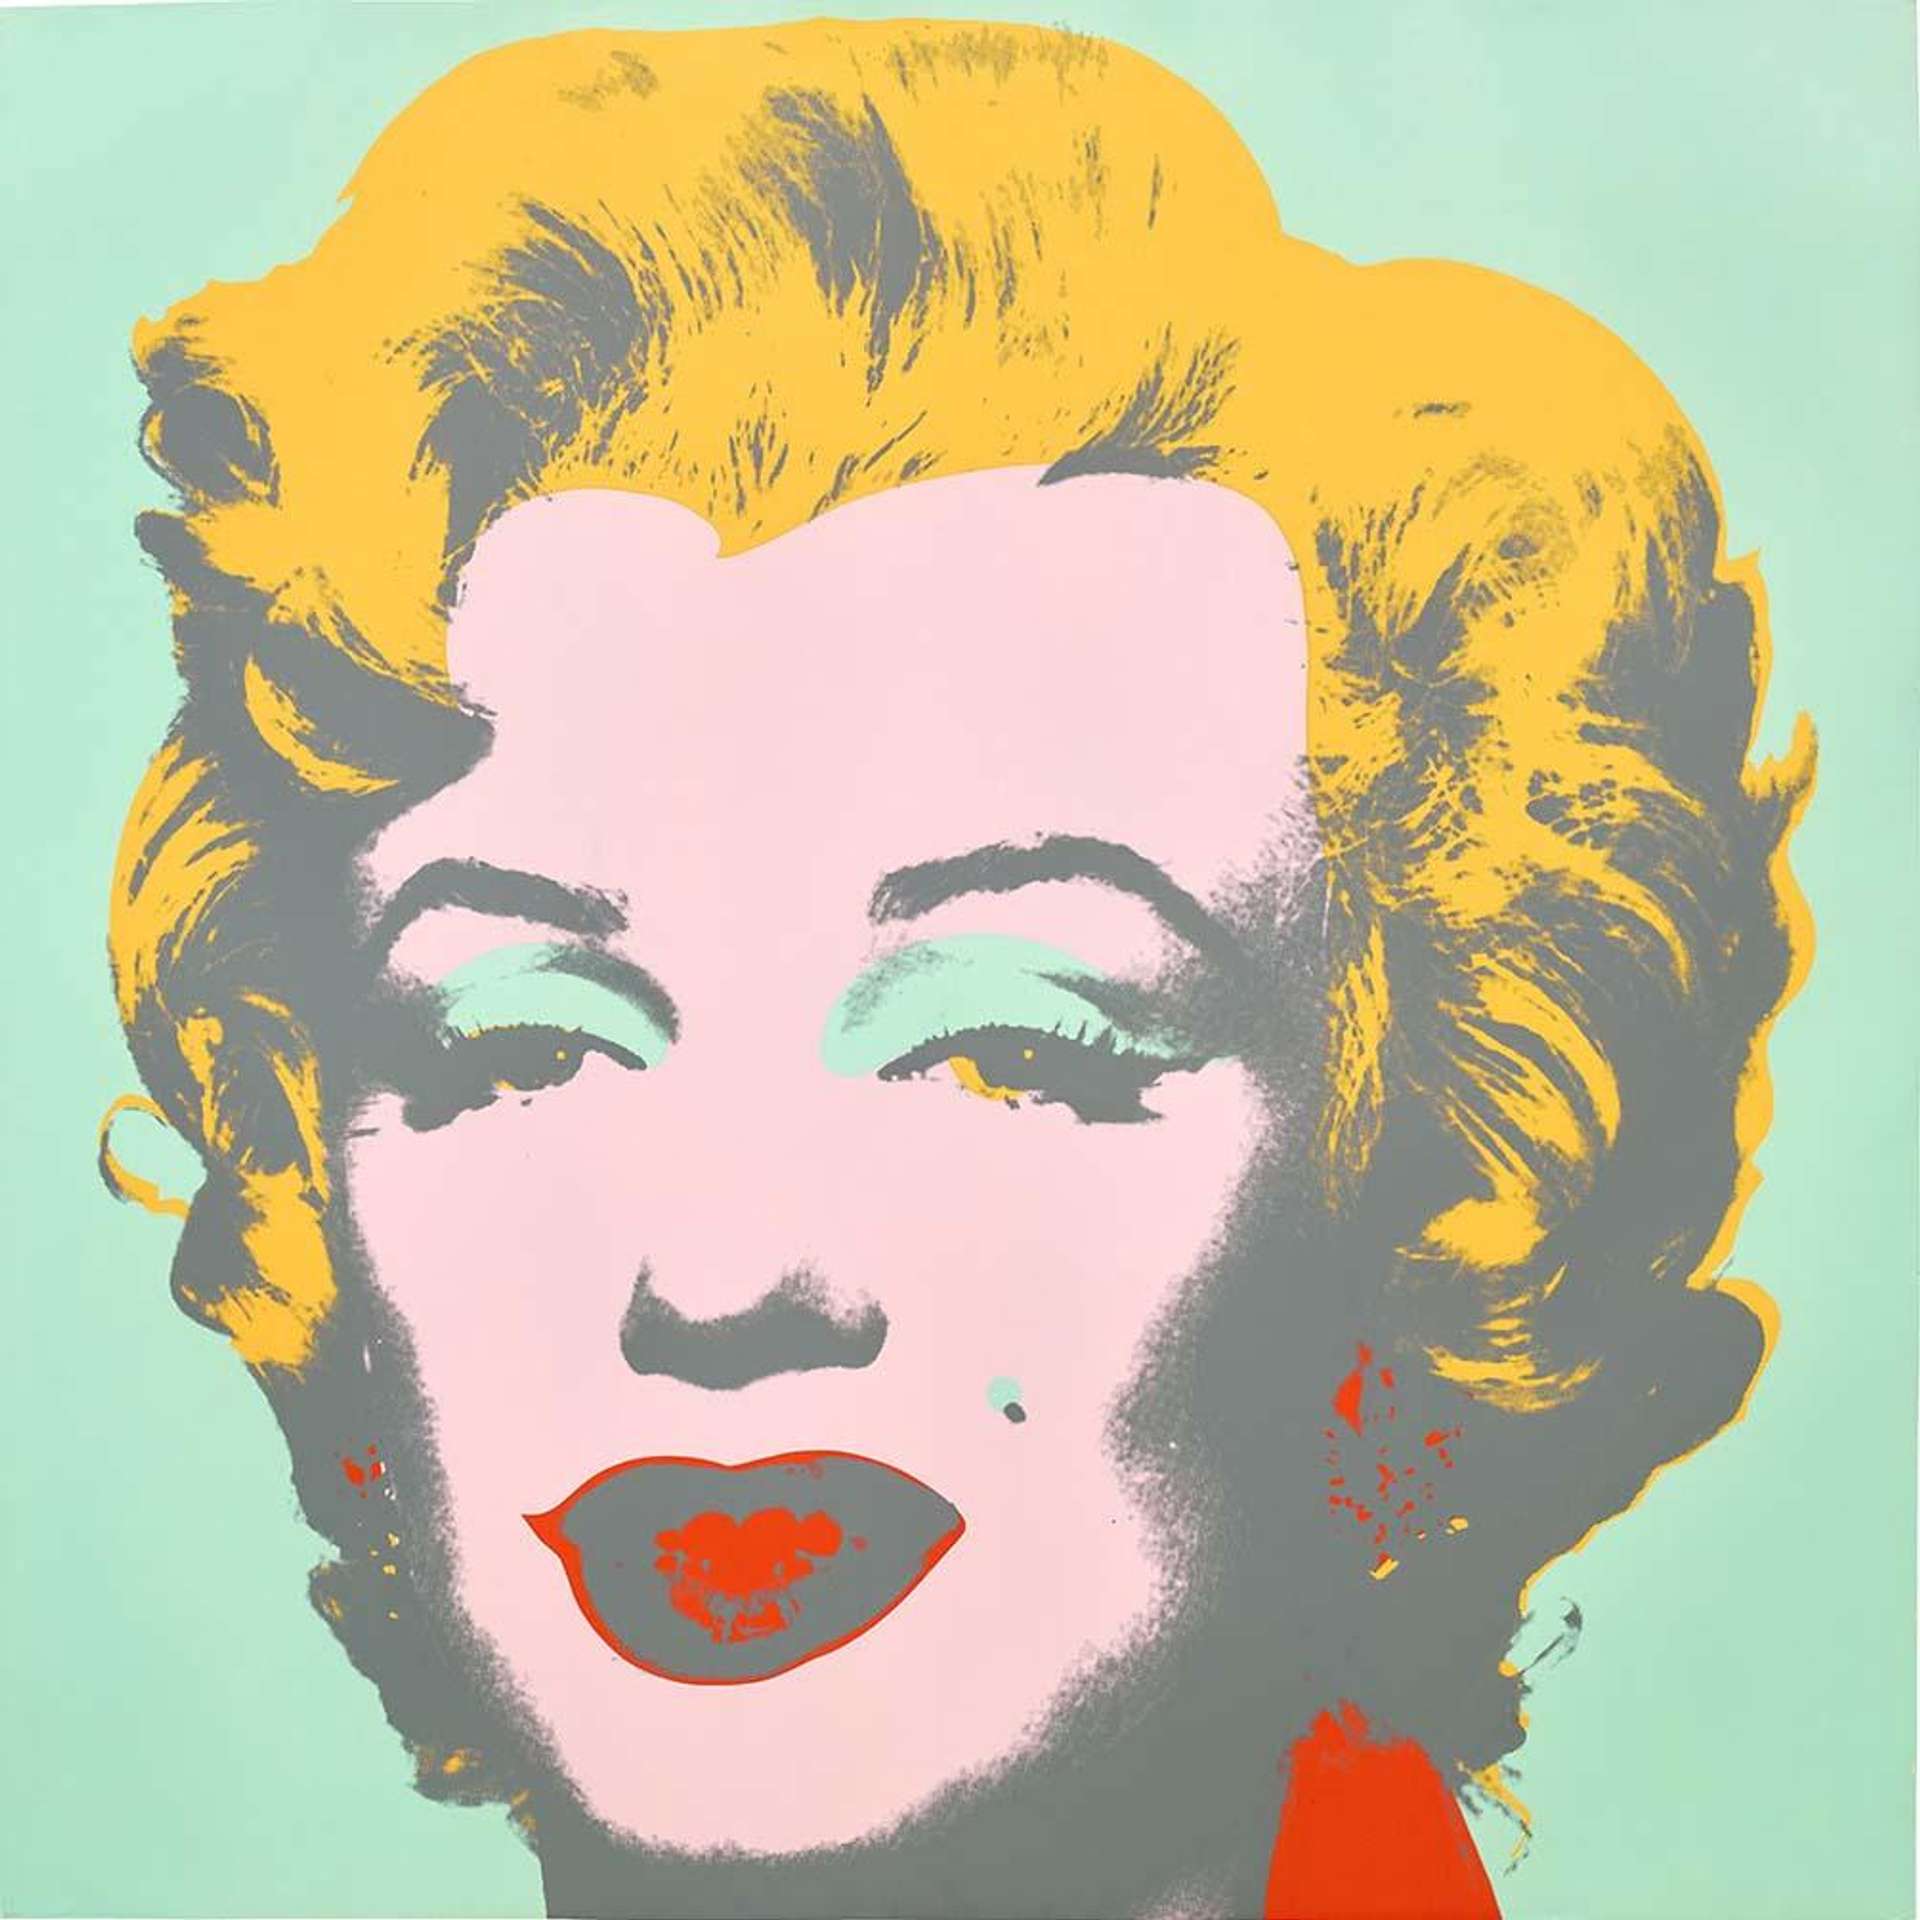 A screenprint by Andy Warhol depicting Marilyn Monroe with bright yellow hair and red lips, set against a mint green background.